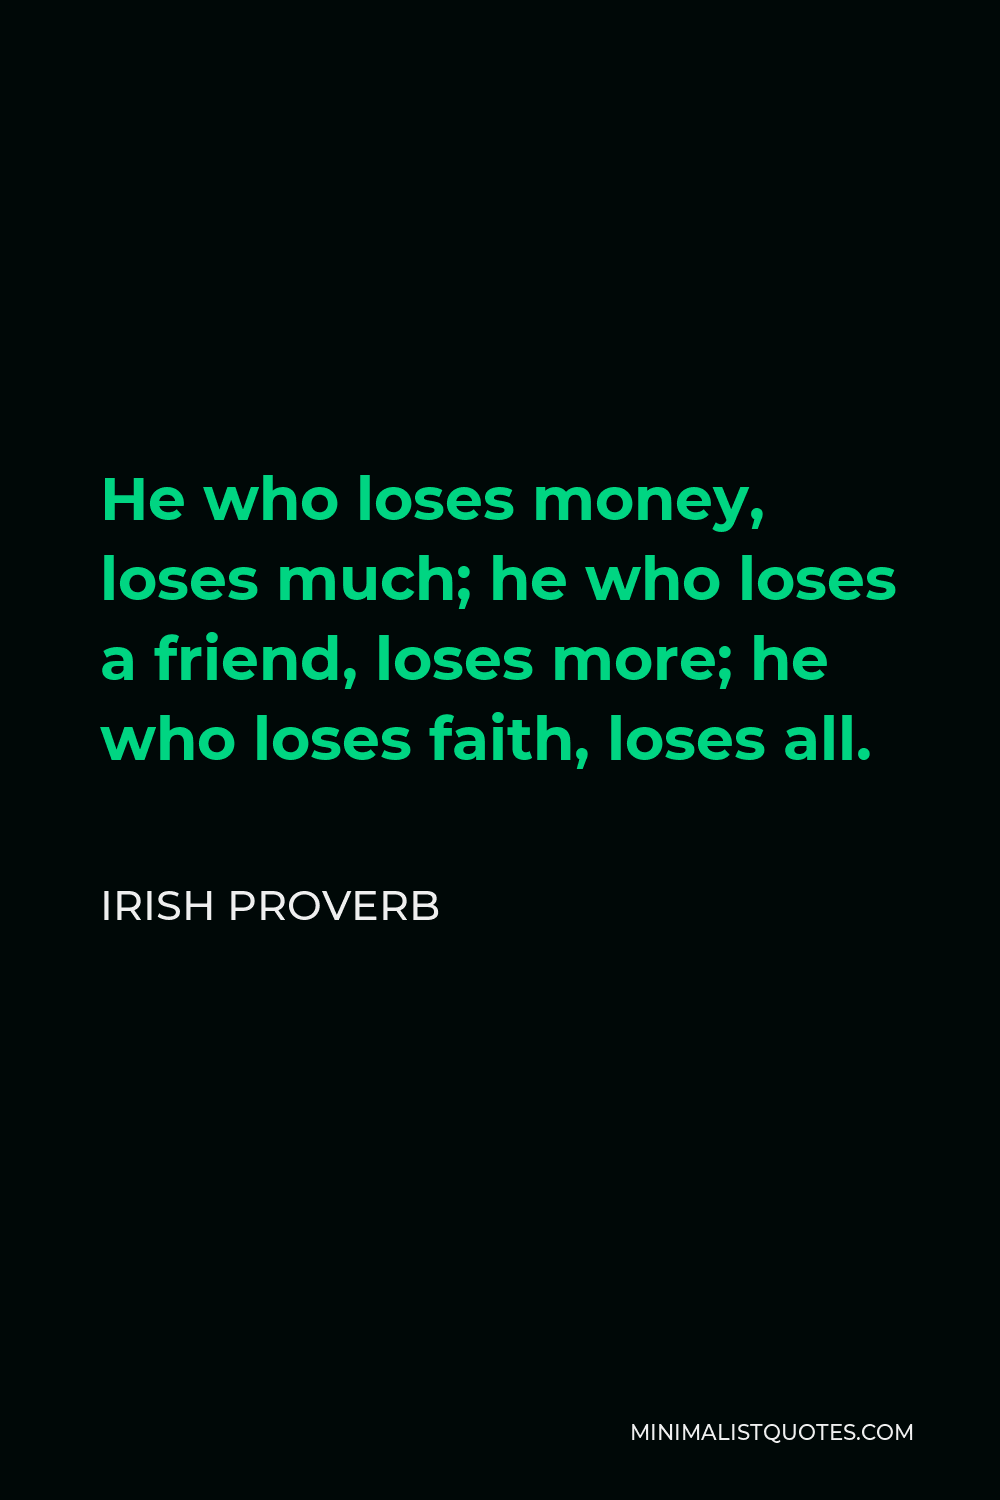 Irish Proverb Quote - He who loses money, loses much; he who loses a friend, loses more; he who loses faith, loses all.